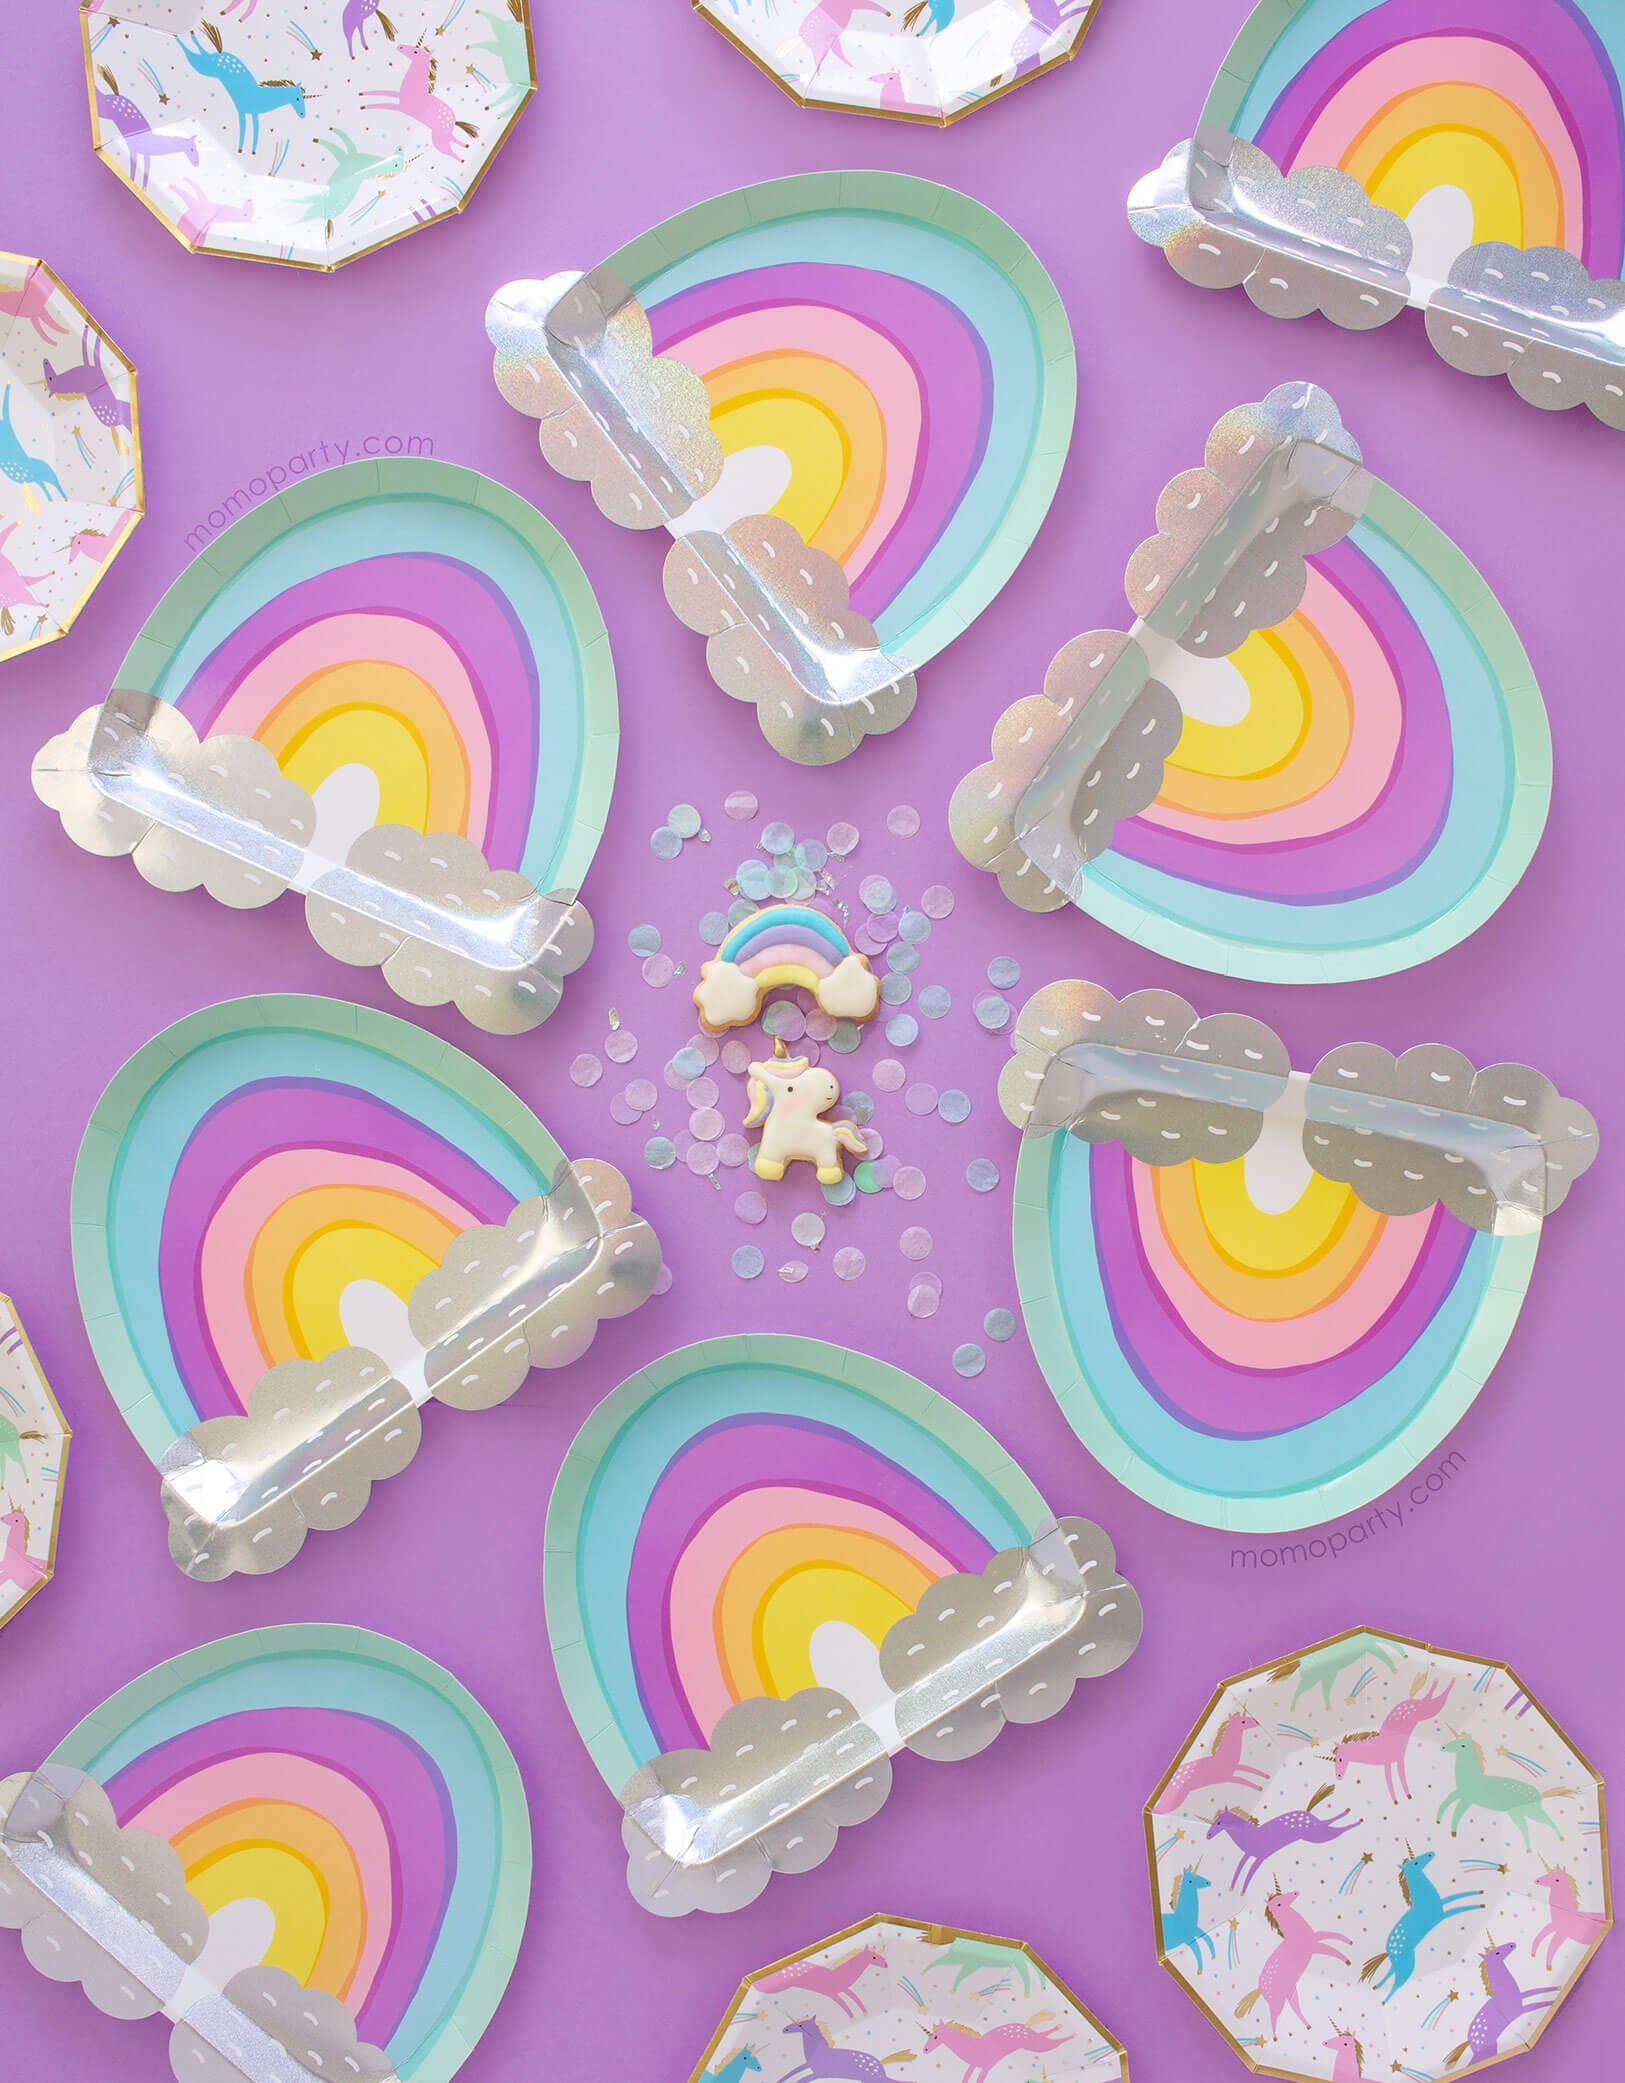  cute unicorn and rainbow cookies around with confetti and rainbow plates